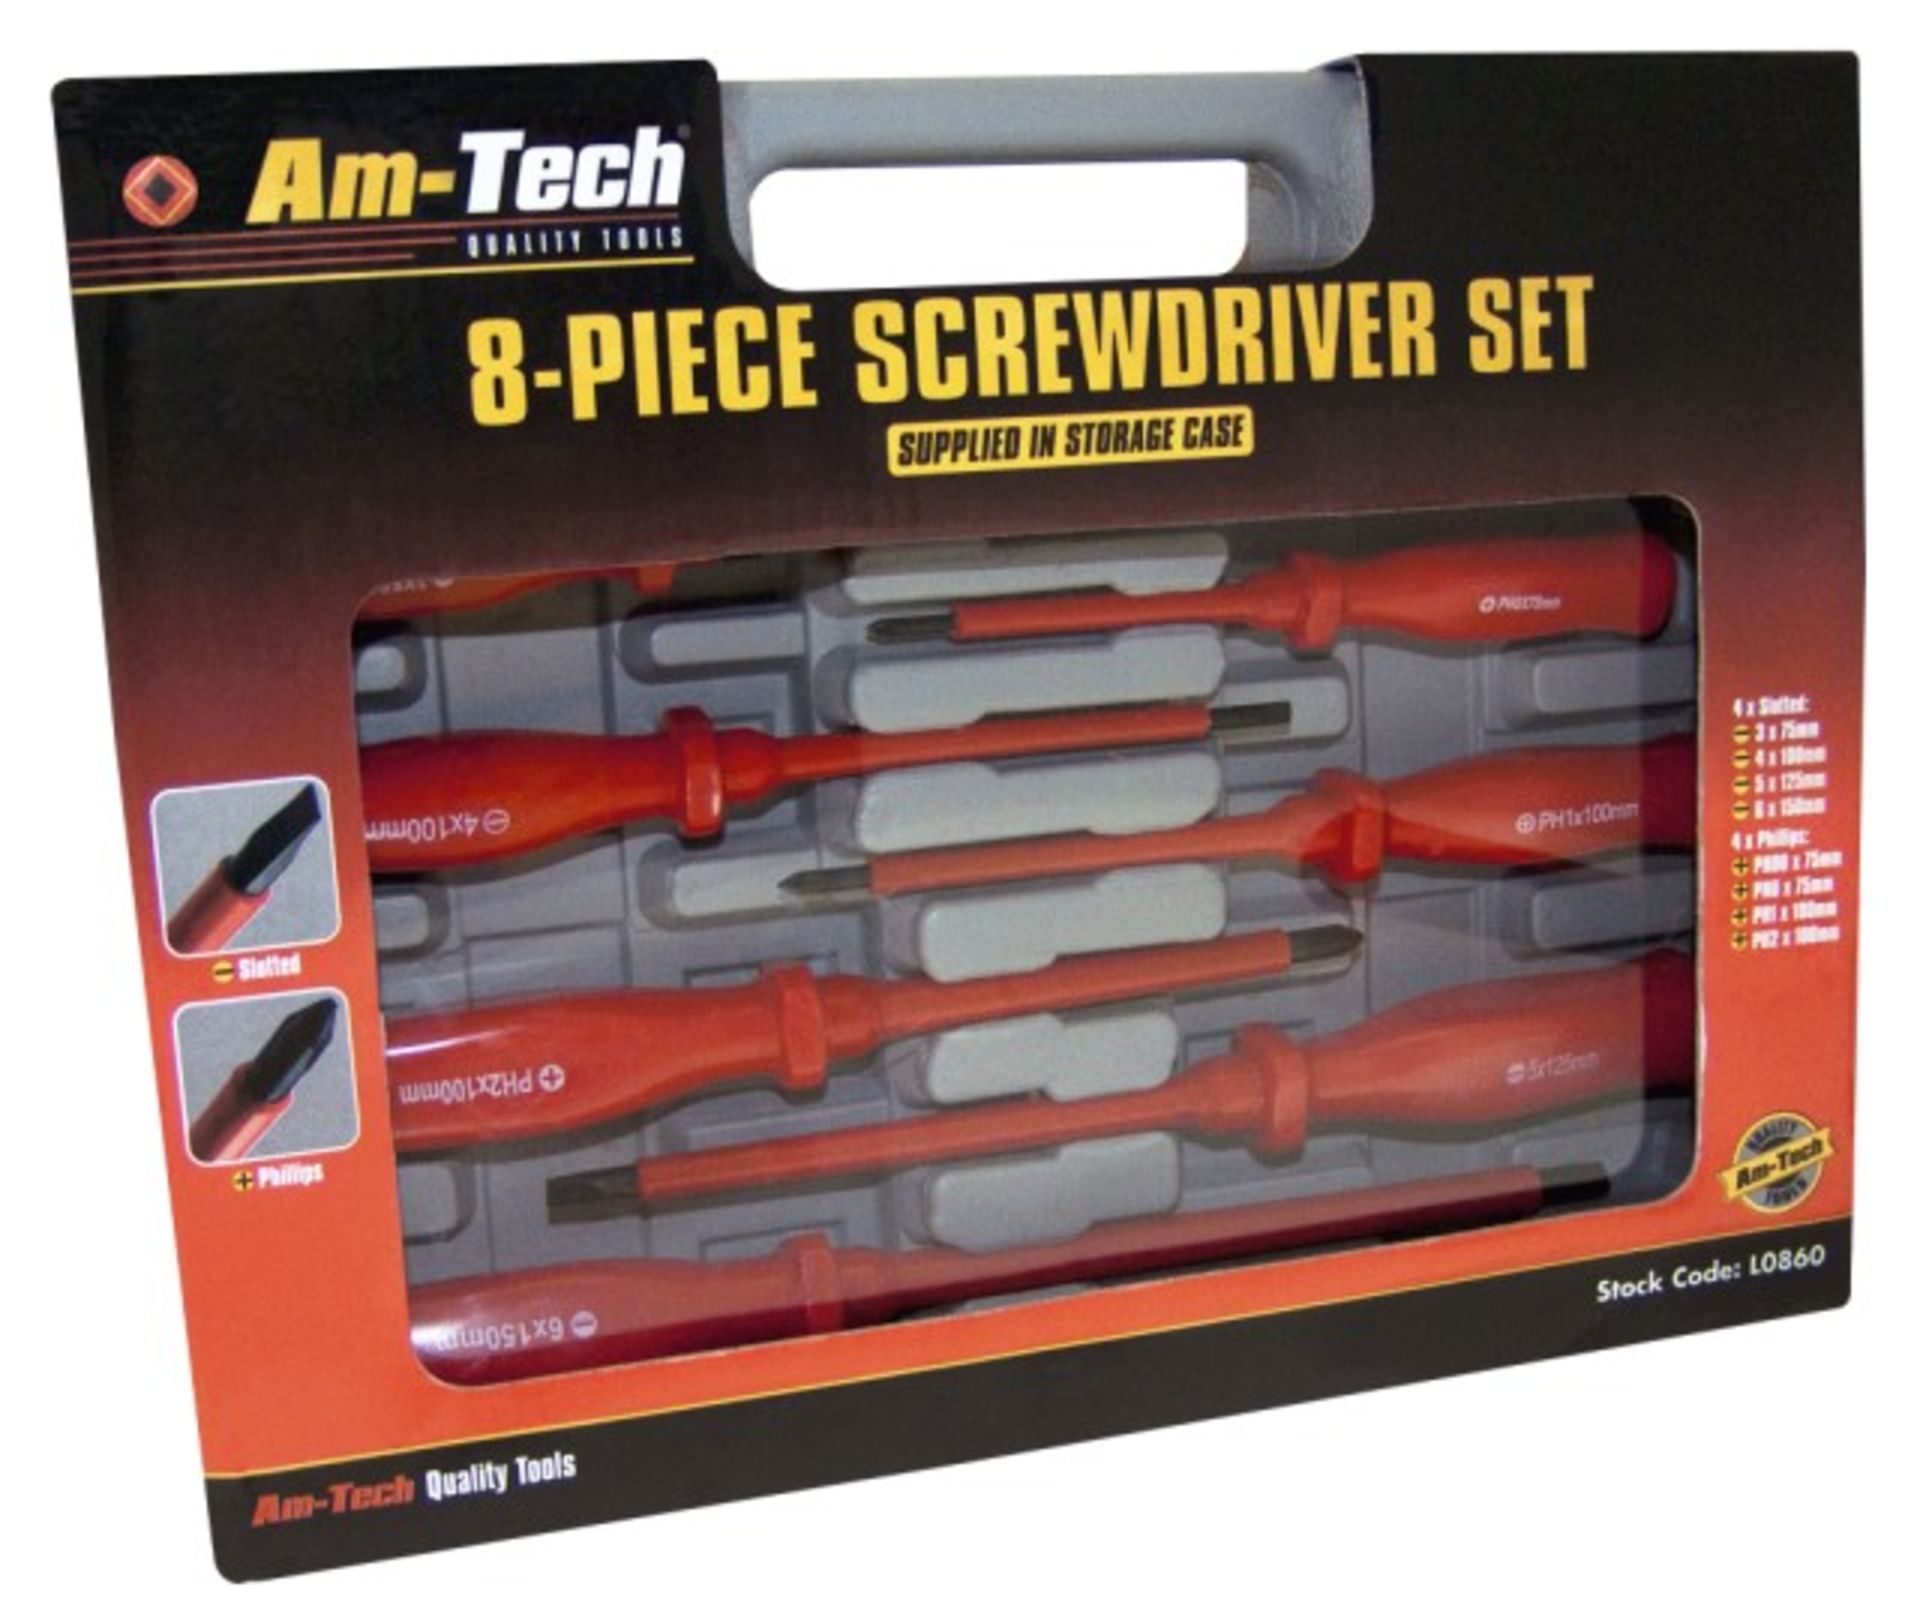 V *TRADE QTY* Brand New Eight Piece Screwdriver Set In Carry case X 3 YOUR BID PRICE TO BE